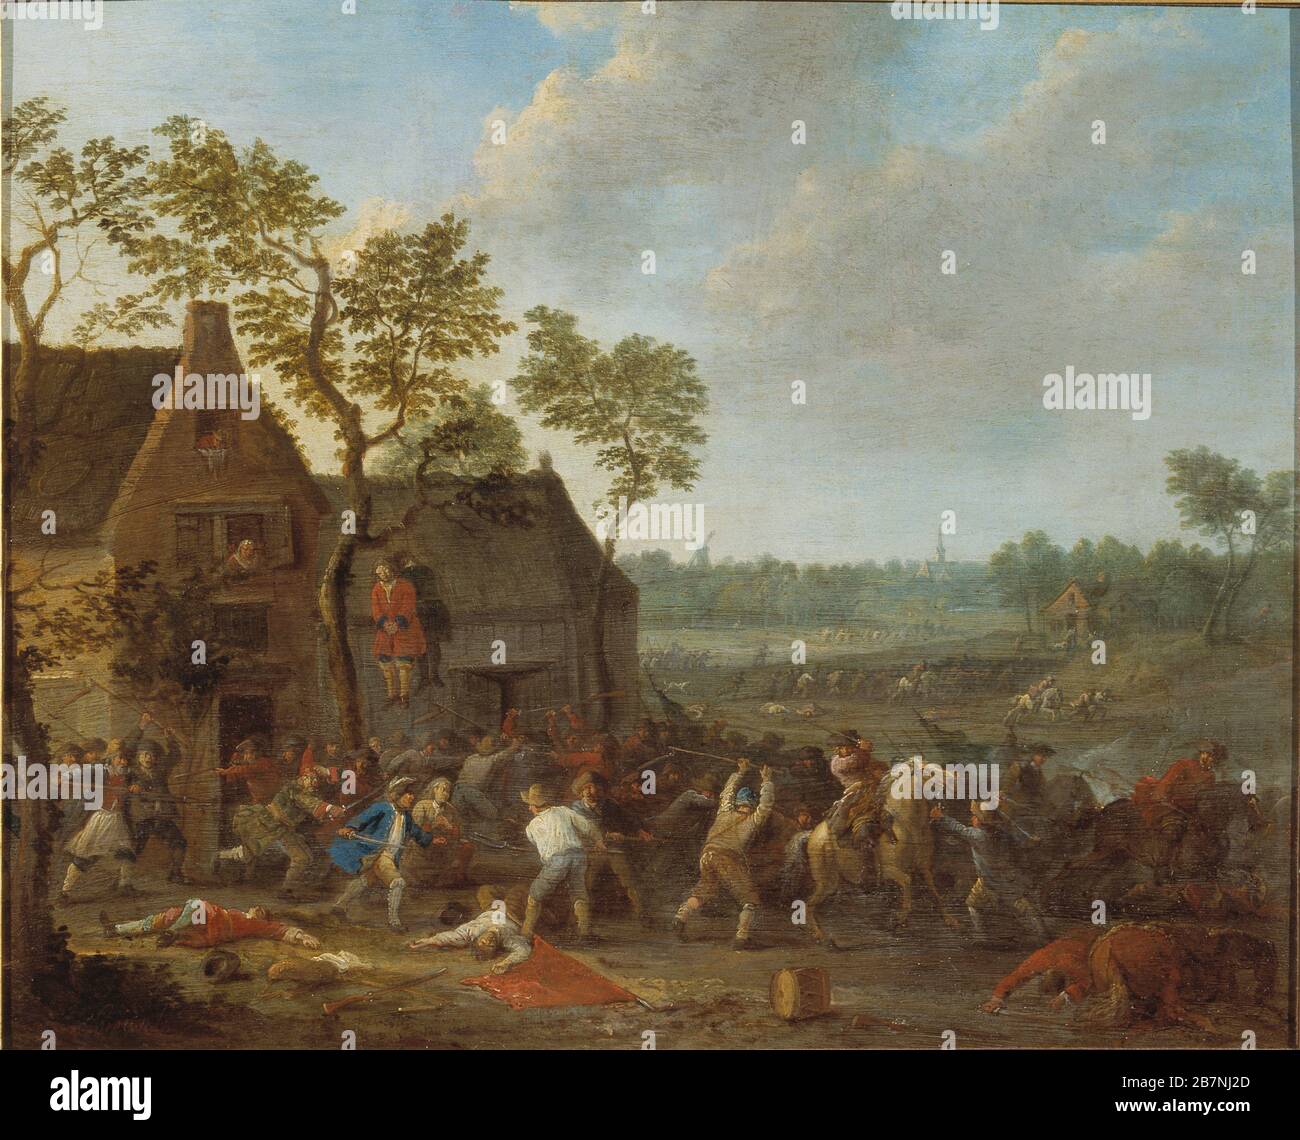 Farm Robbery, c. 1710. Found in the Collection of Museum Mayer van den Bergh, Antwerp. Stock Photo